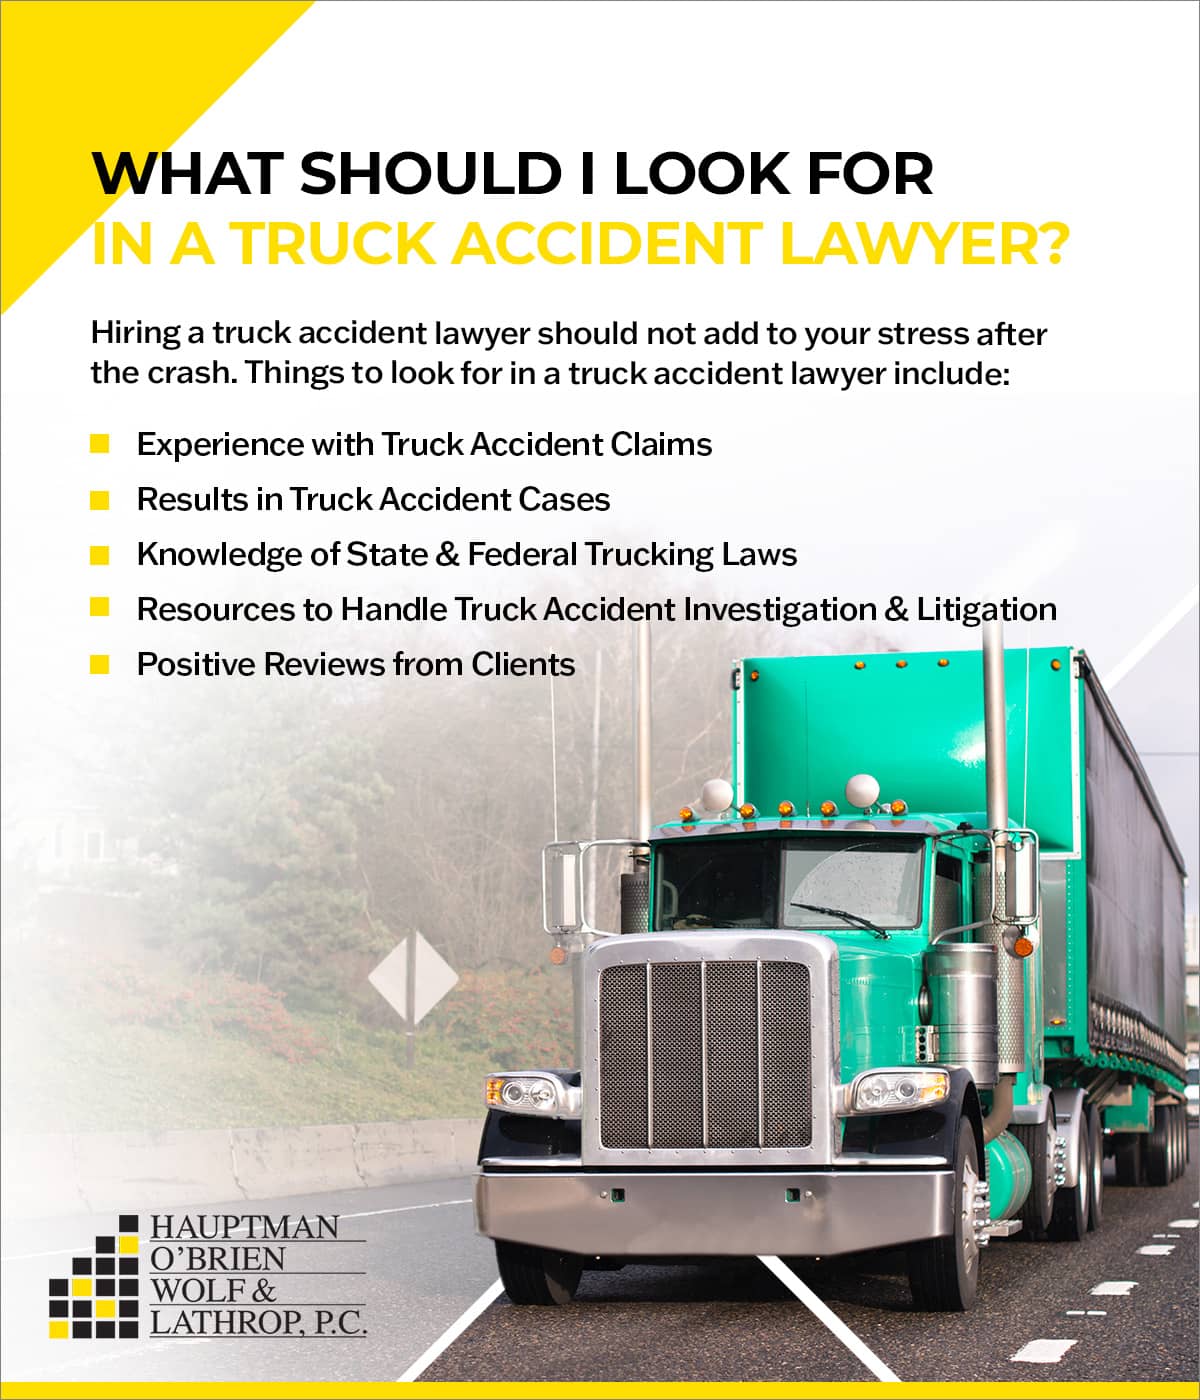 What should I look for in a truck accident lawyer? | Hauptman, O'Brien, Wolf & Lathrop